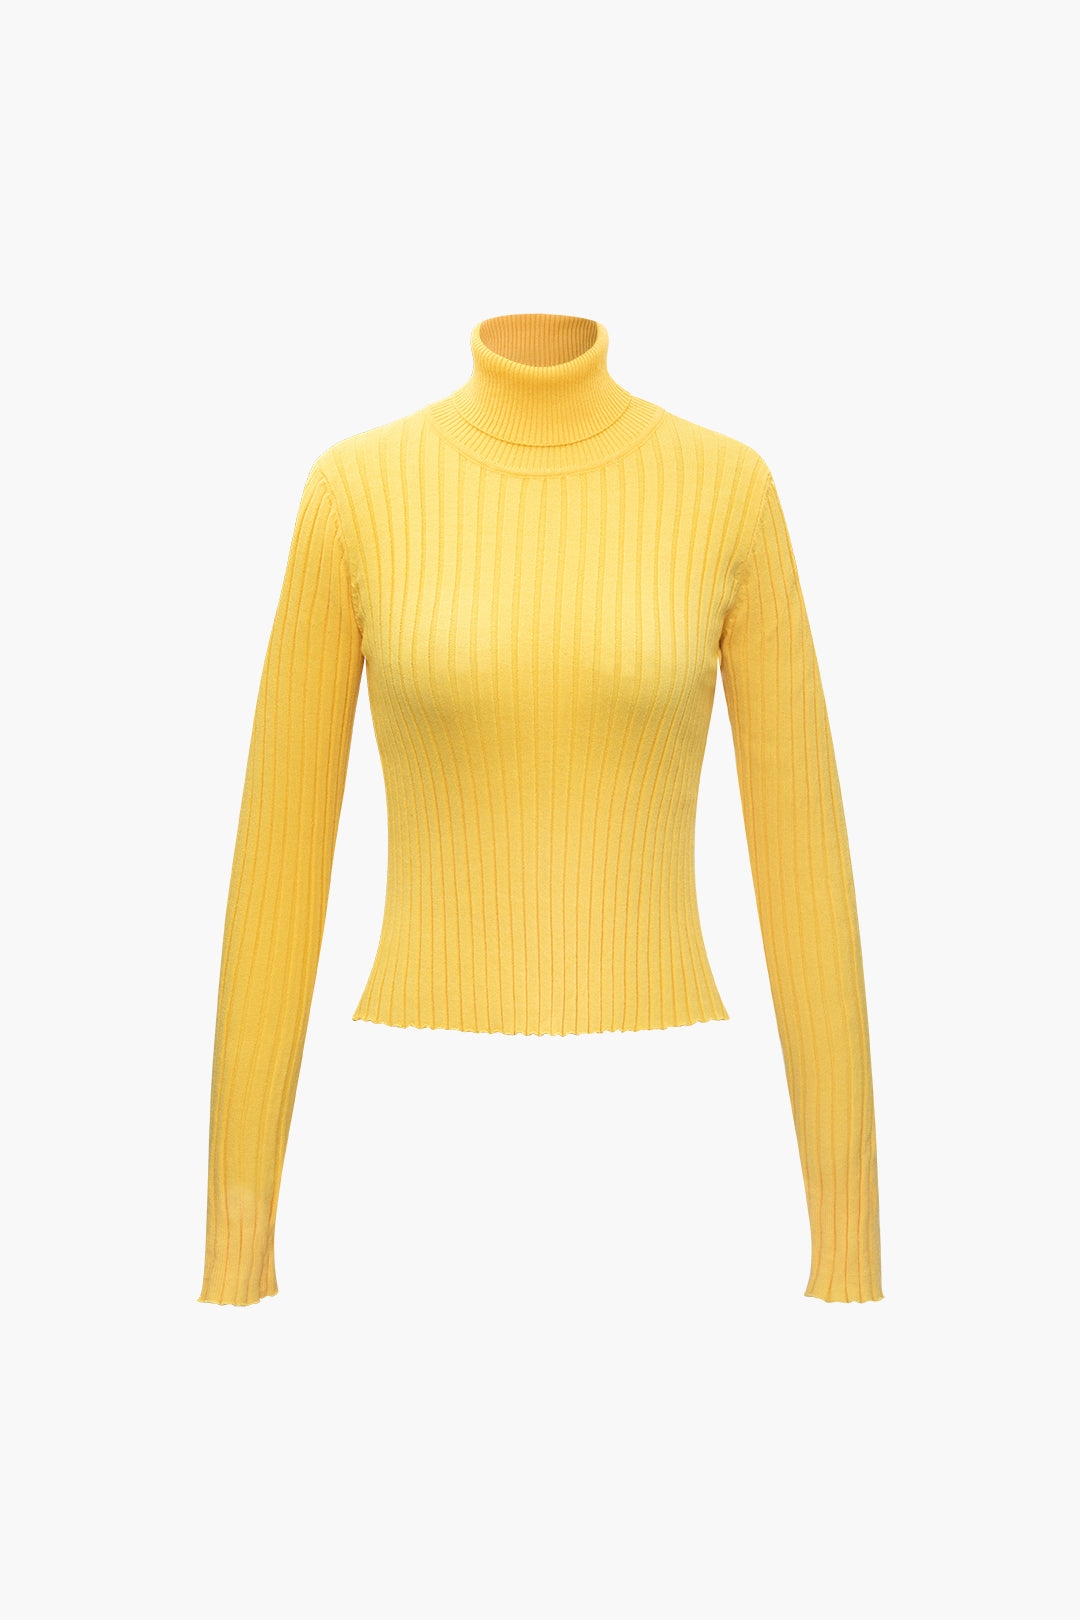 Solid Turtleneck Rib Knit Long Sleeve Top